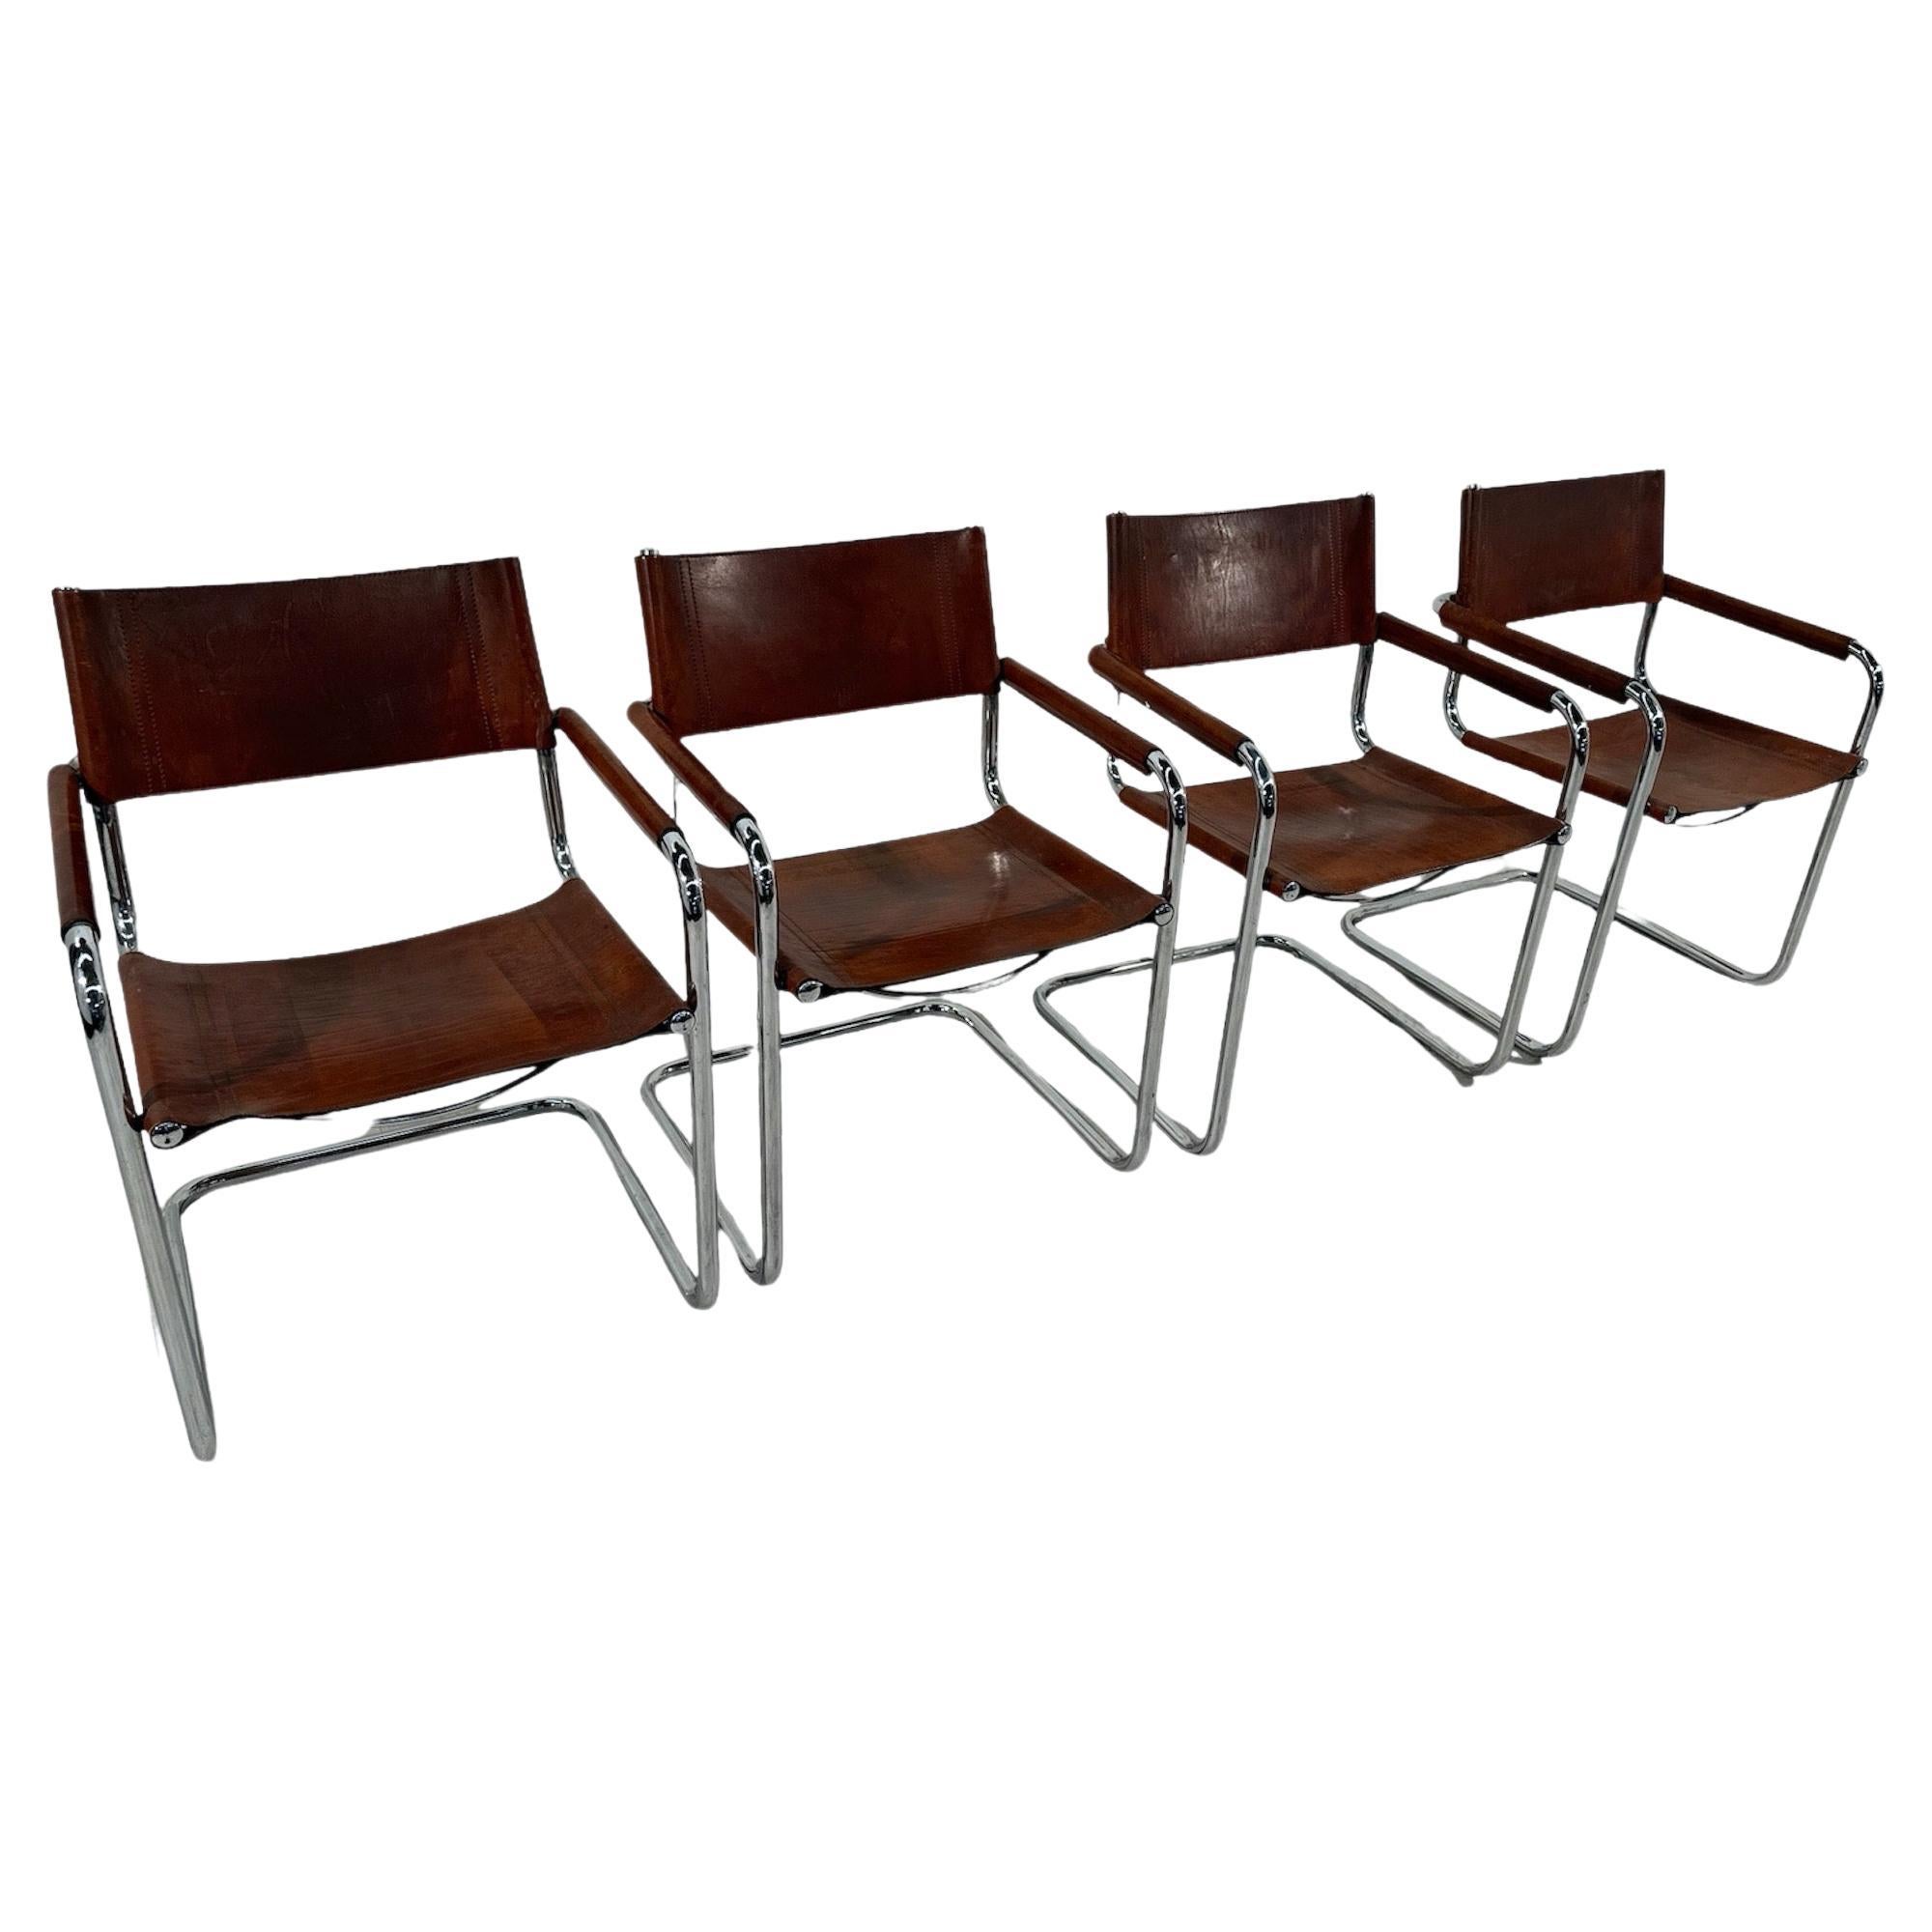 Vintage S34 Armchairs by Mart Stam & Marcel Breuer for Thonet, 1950s For Sale